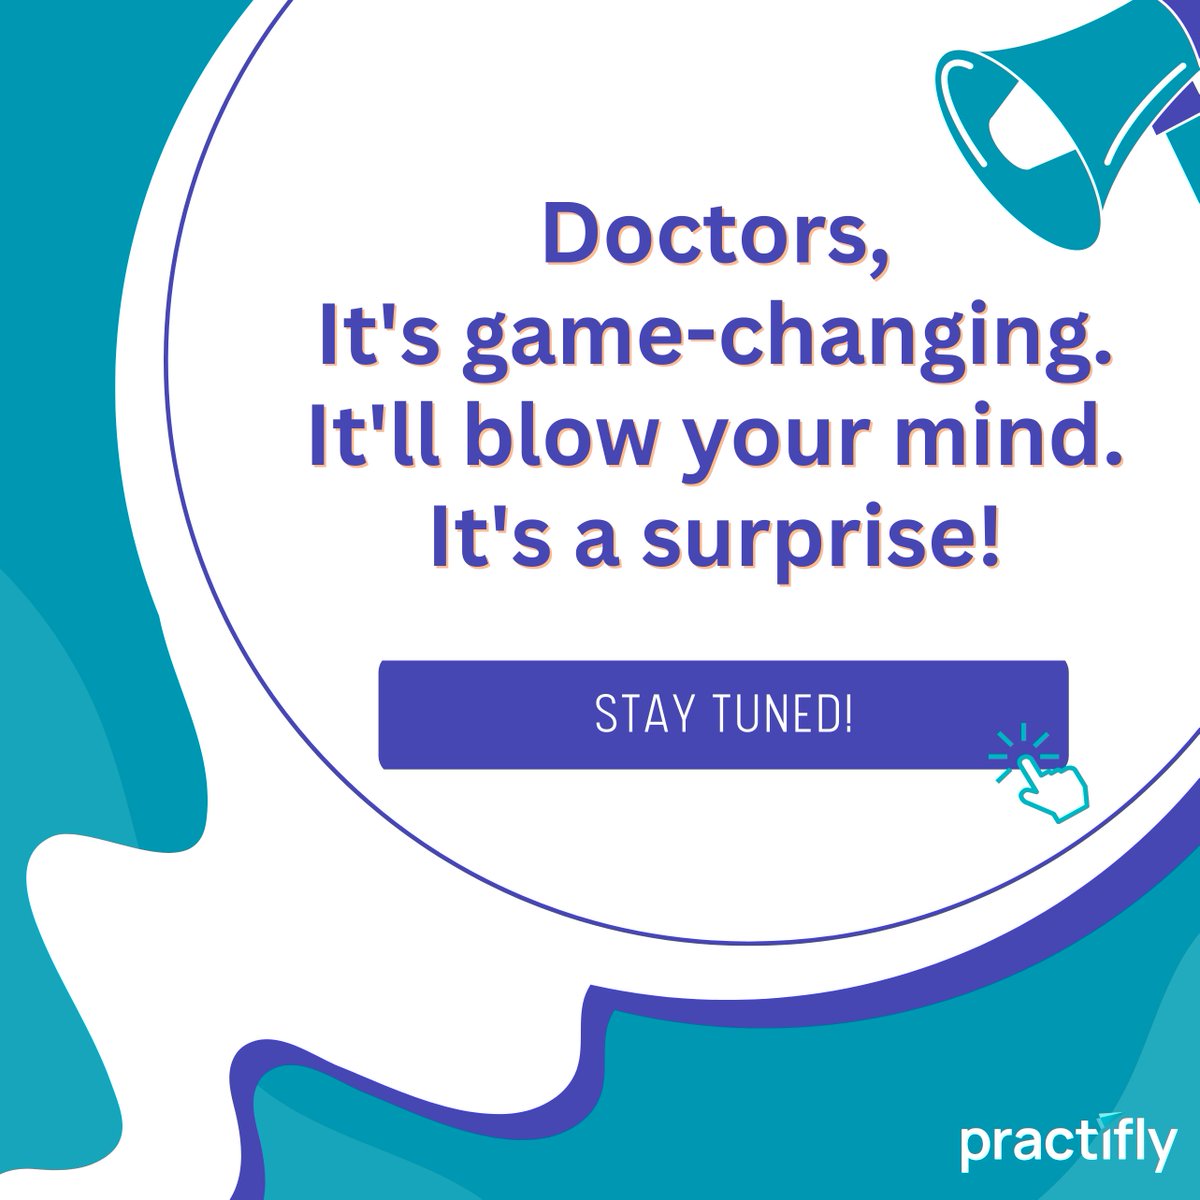 📣 Attention, doctors, 
Don't miss out on the big reveal that's just around the corner.    #healthcare #healthcareprofessionals #medicalpractice #doctors #medical #healthcareworkers #practifly